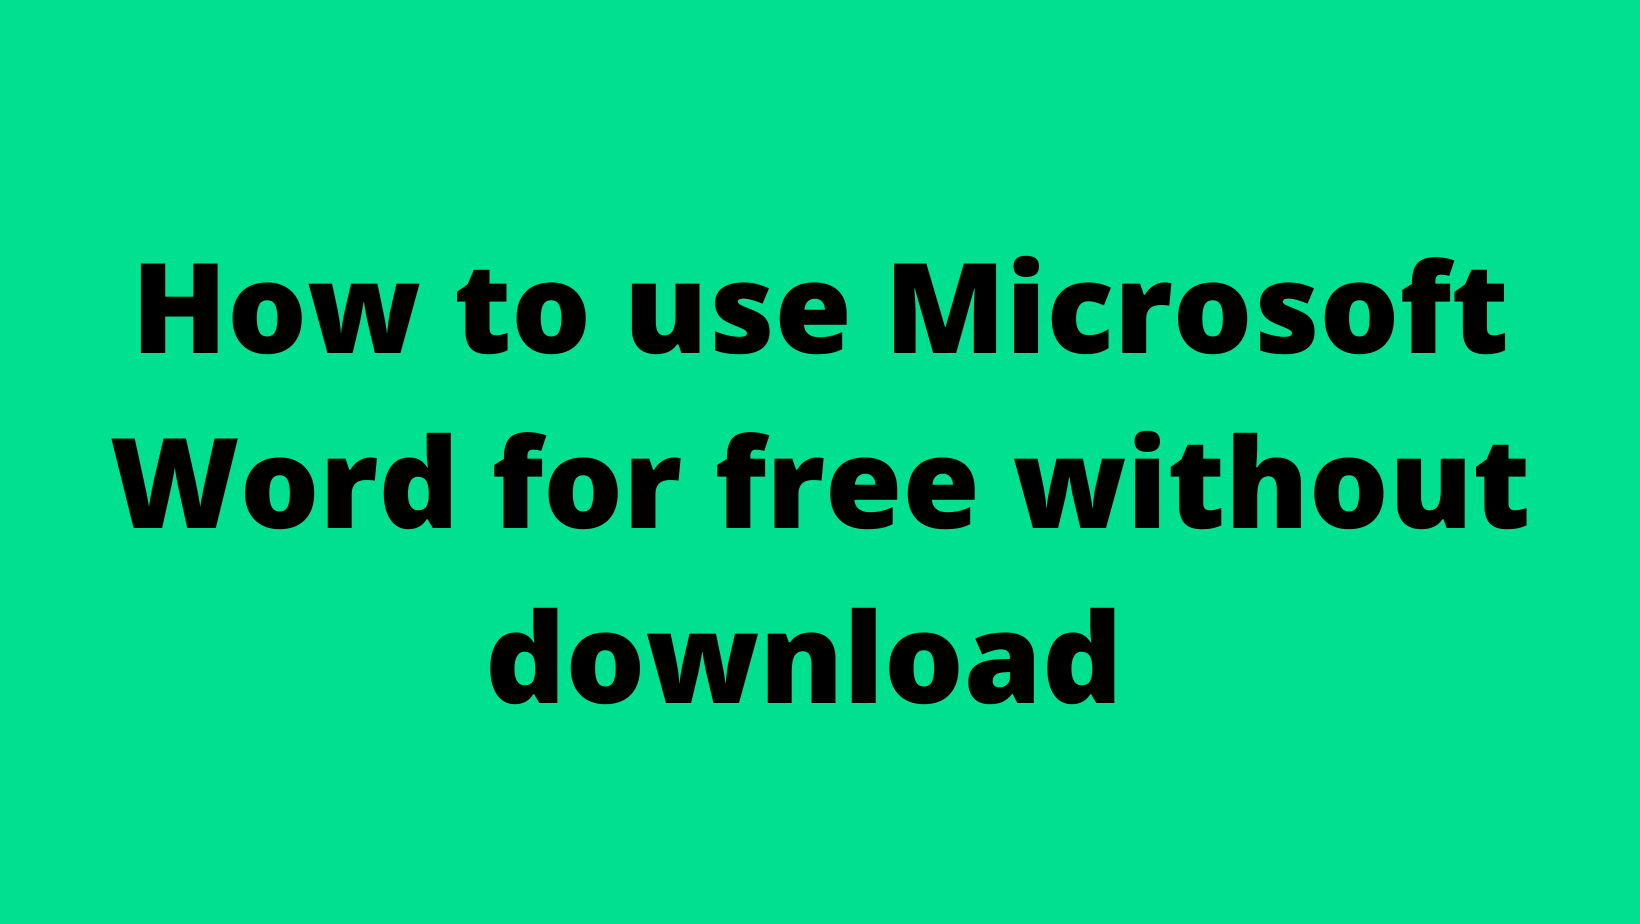 Microsoft Word for free